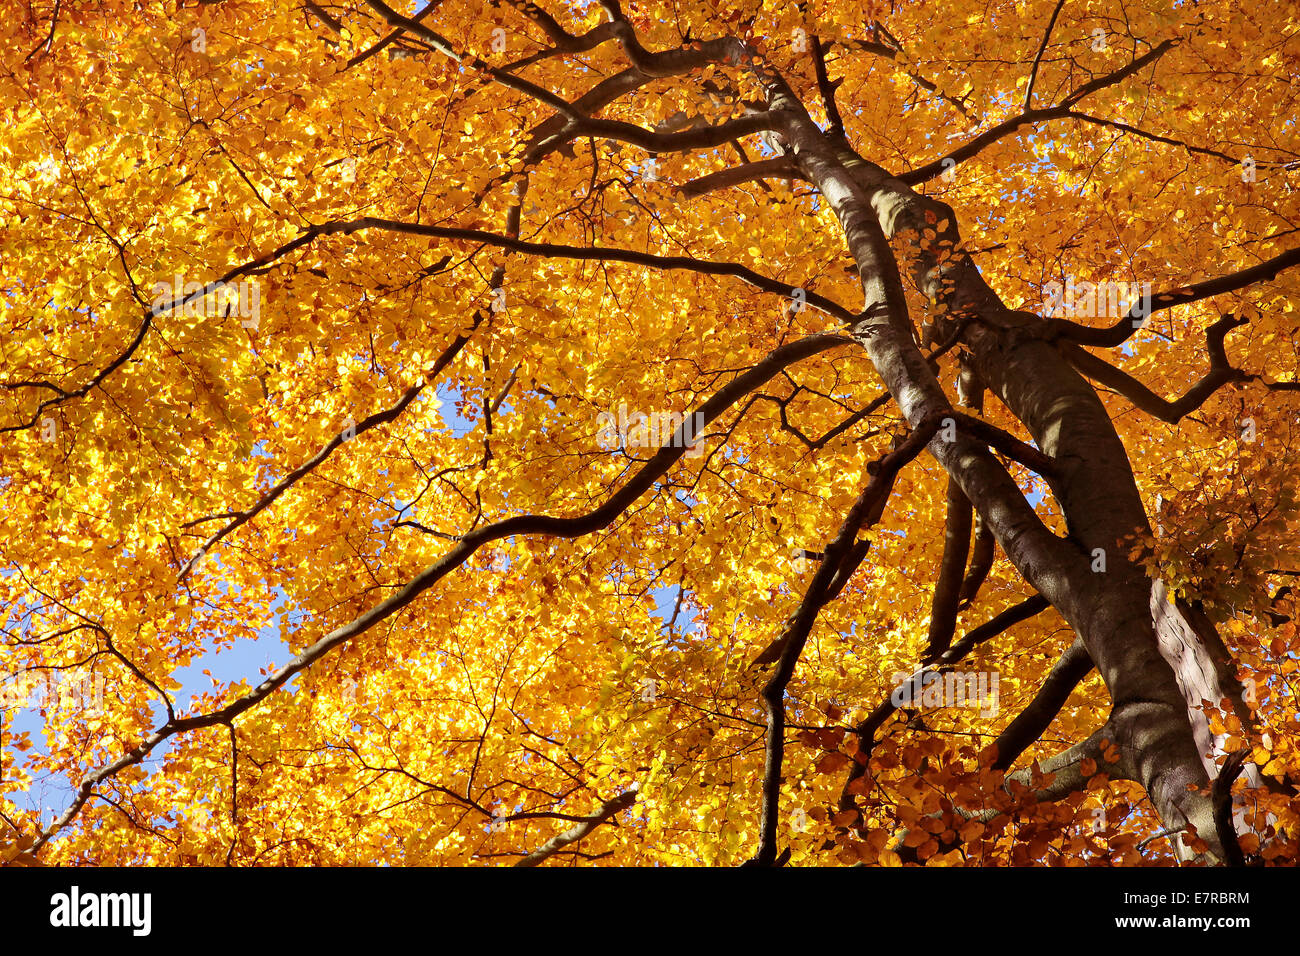 Indian Beech Tree High Resolution Stock Photography and Images - Alamy